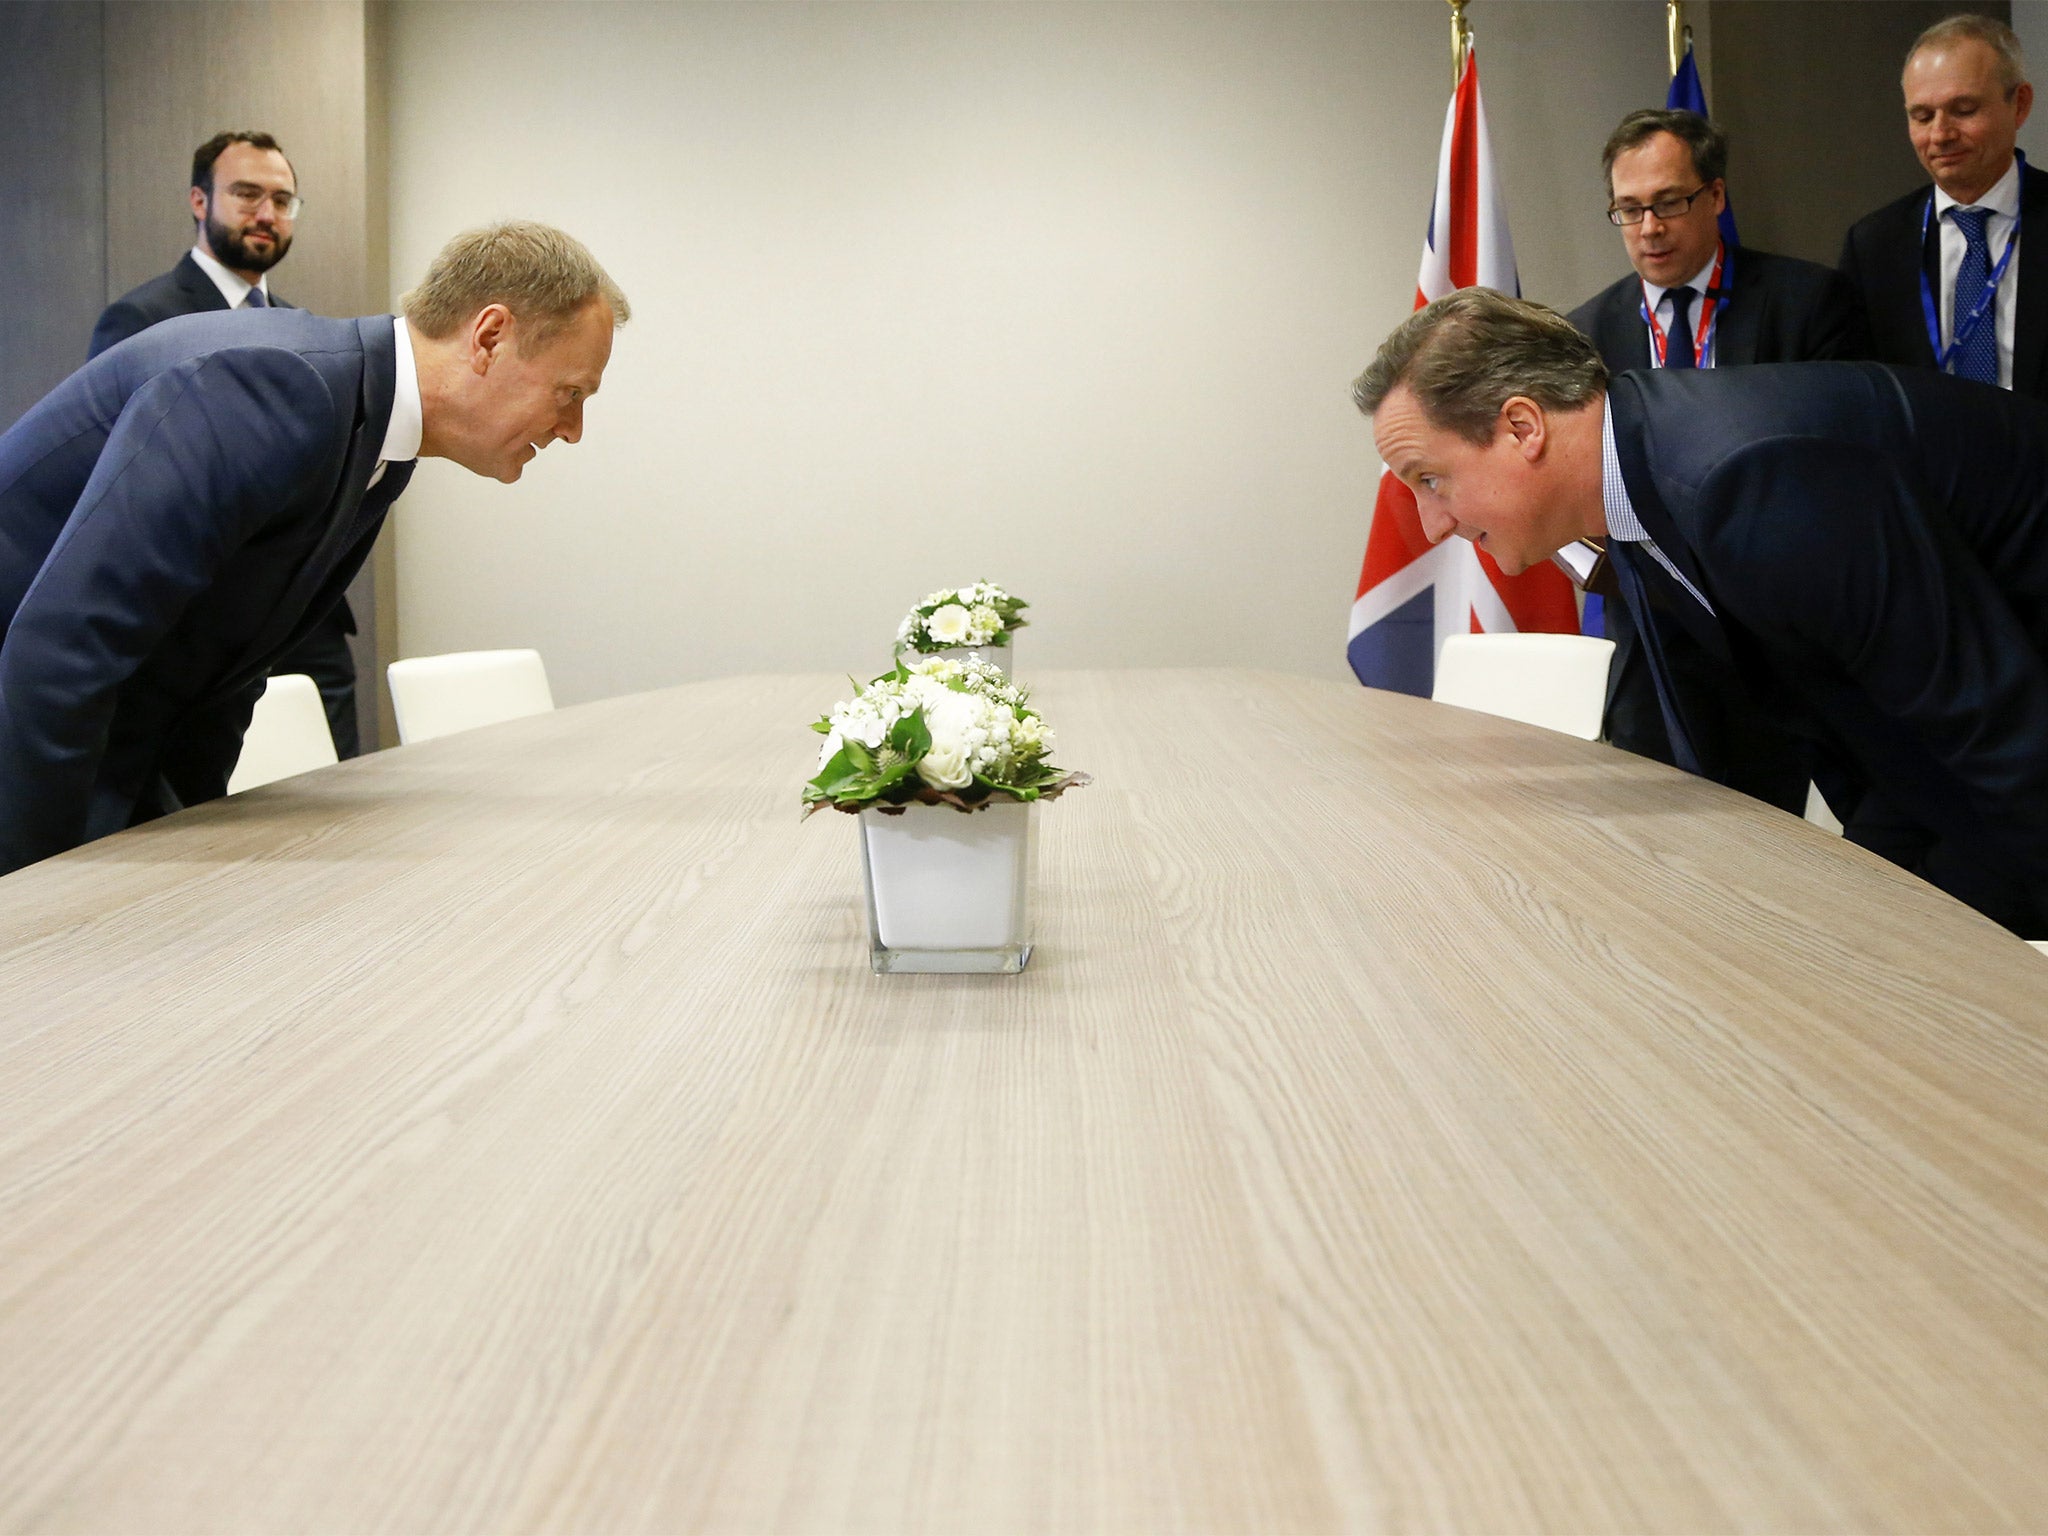 David Cameron and the European Council President Donald Tusk get down to business in Brussels